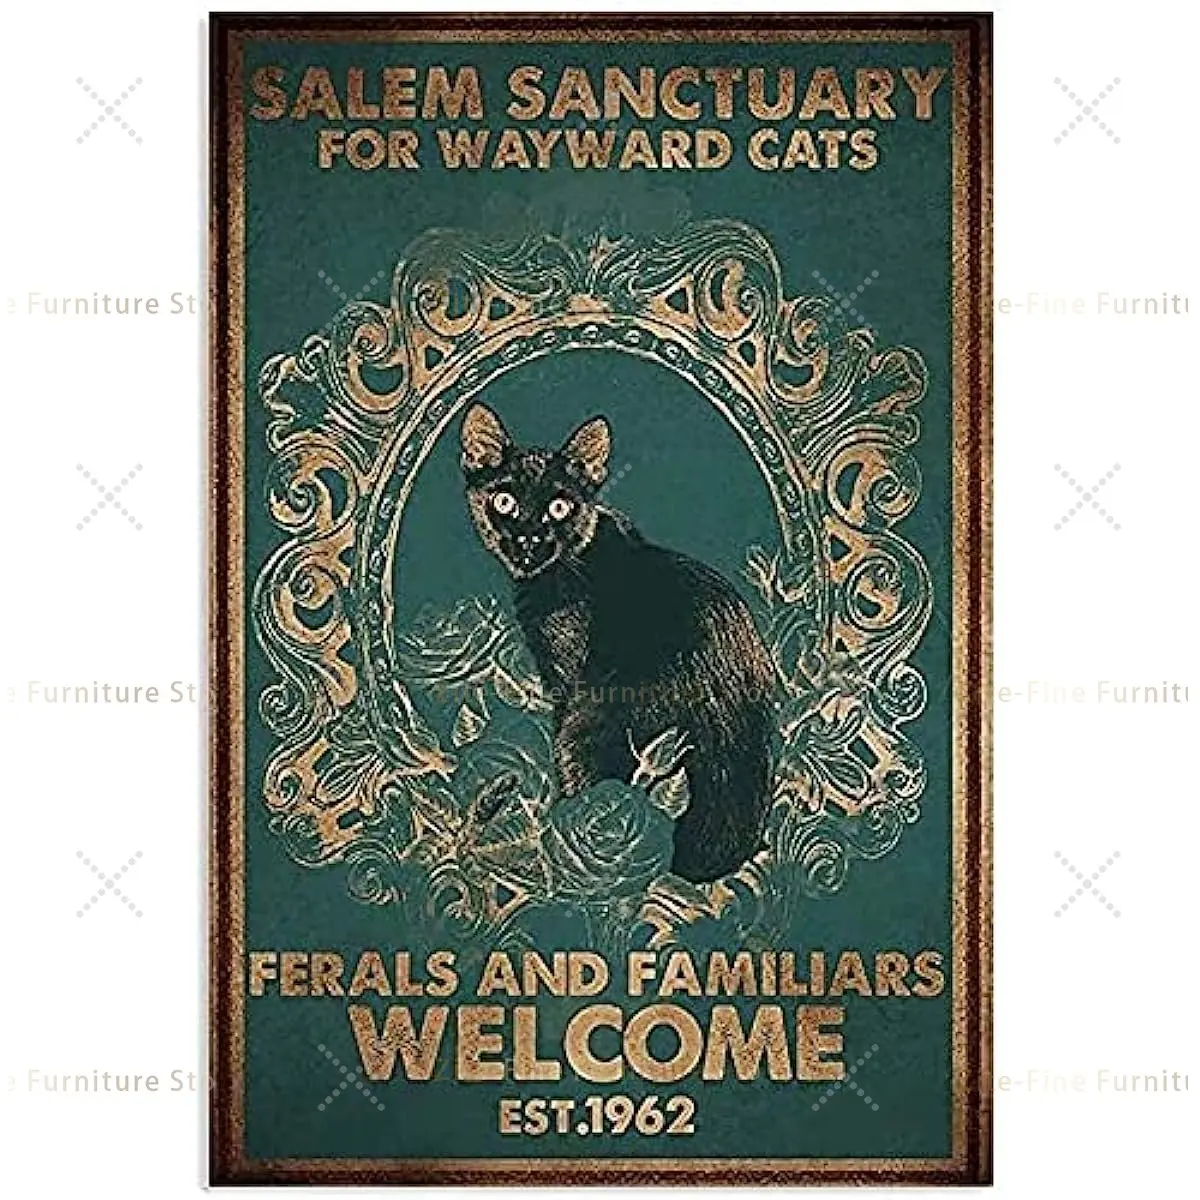 

Black Cat Metal Tin Sign,Salem Sanctuary for Wayward Cats,Vintage Poster Plaque Sign for Home Restaurant Wall Decor,8X12 Inch